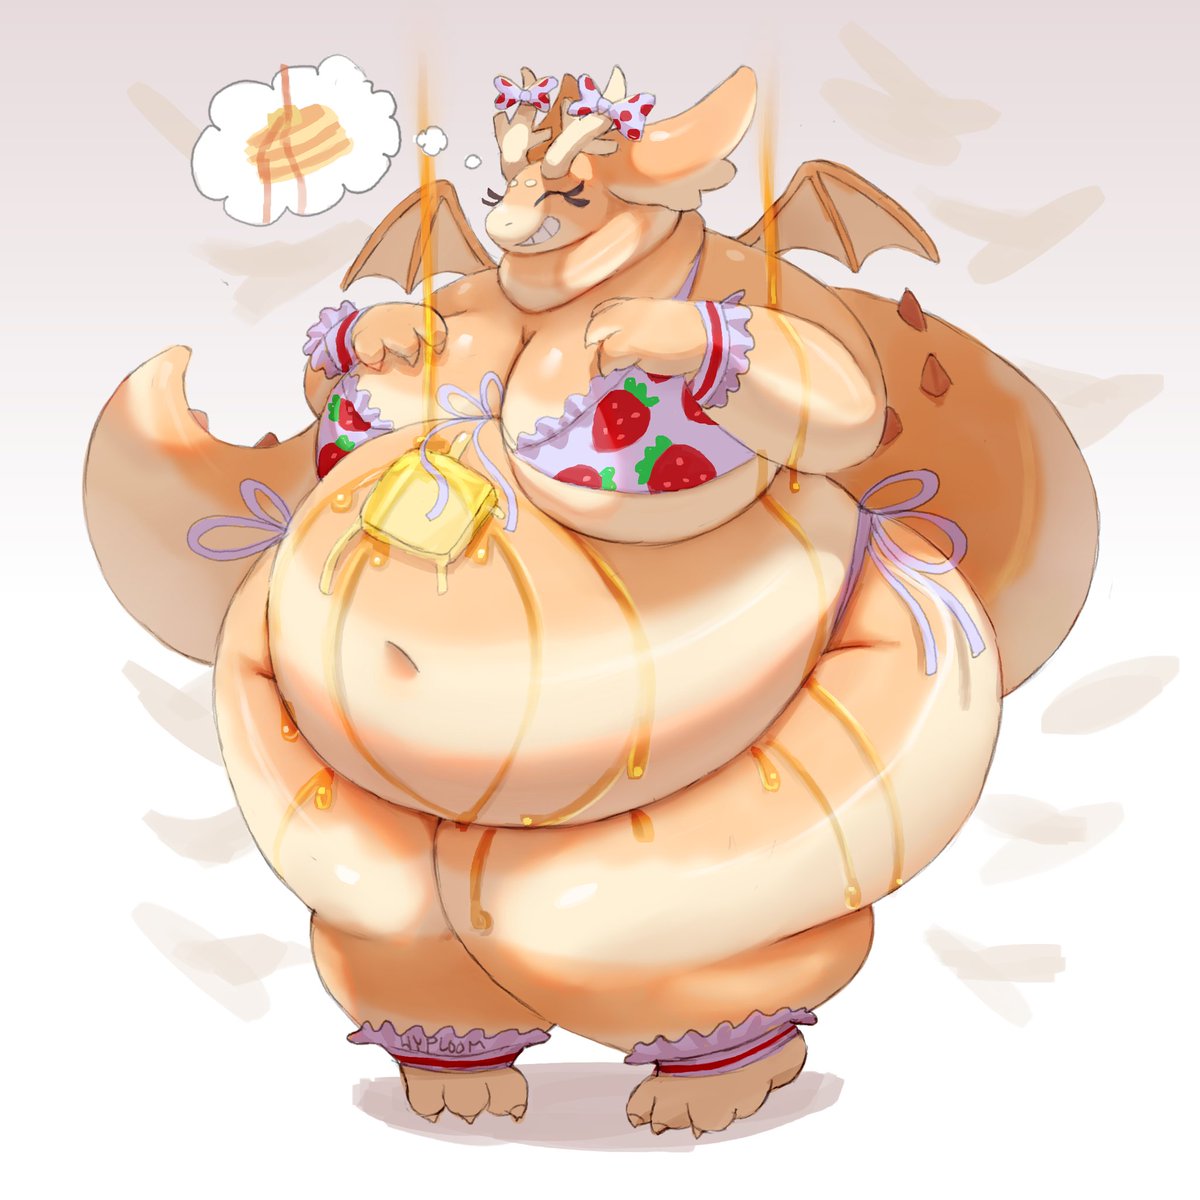 Silly piece, thinking about a wholesome breakfast. This pancake dragon doesn't know where this syrup is coming from, but it just means there's more to lick I guess lol